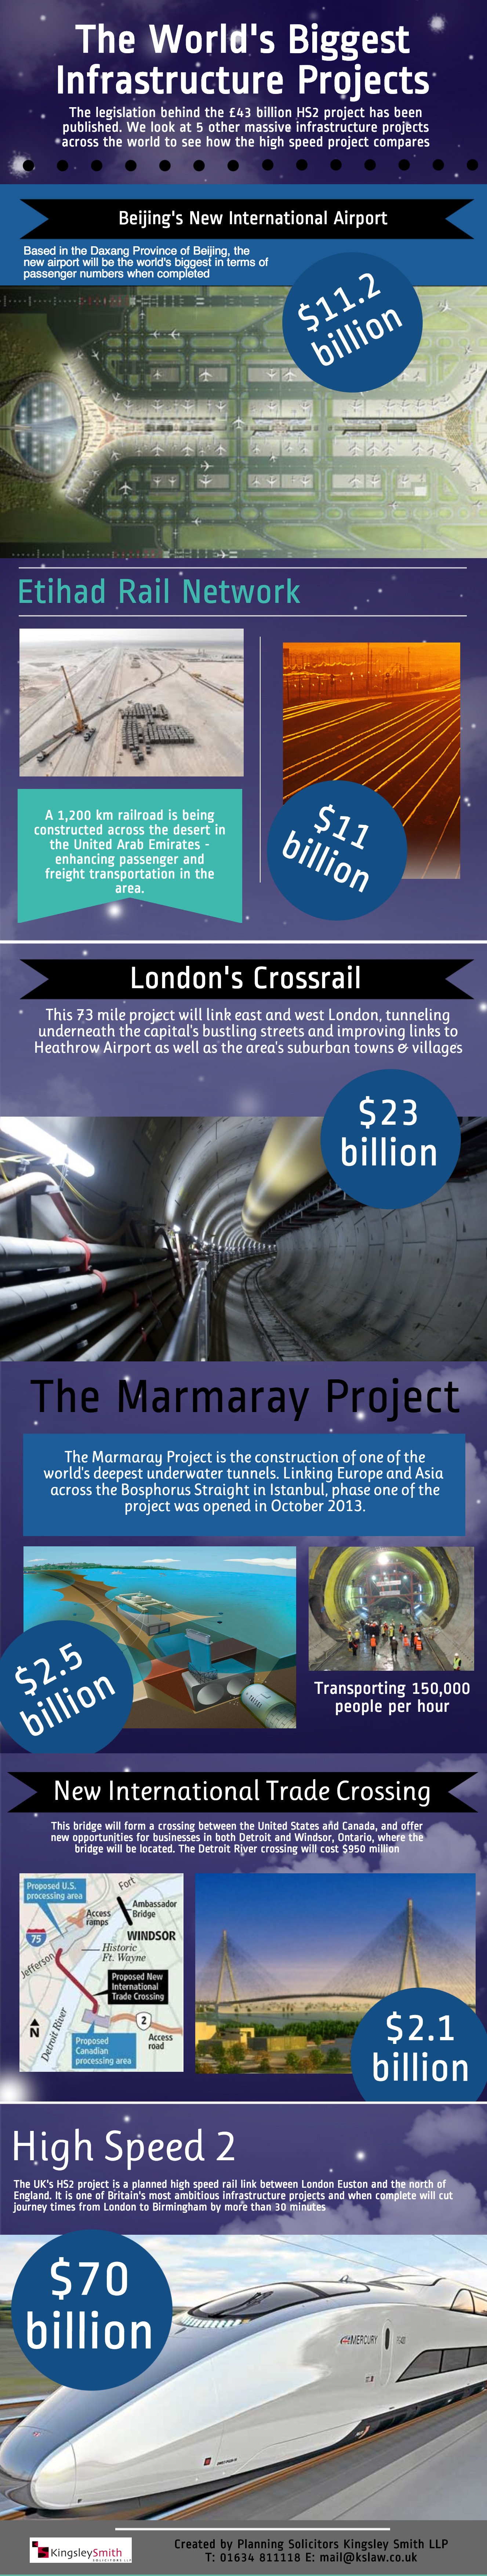 Worlds Biggest Infrastructure Projects